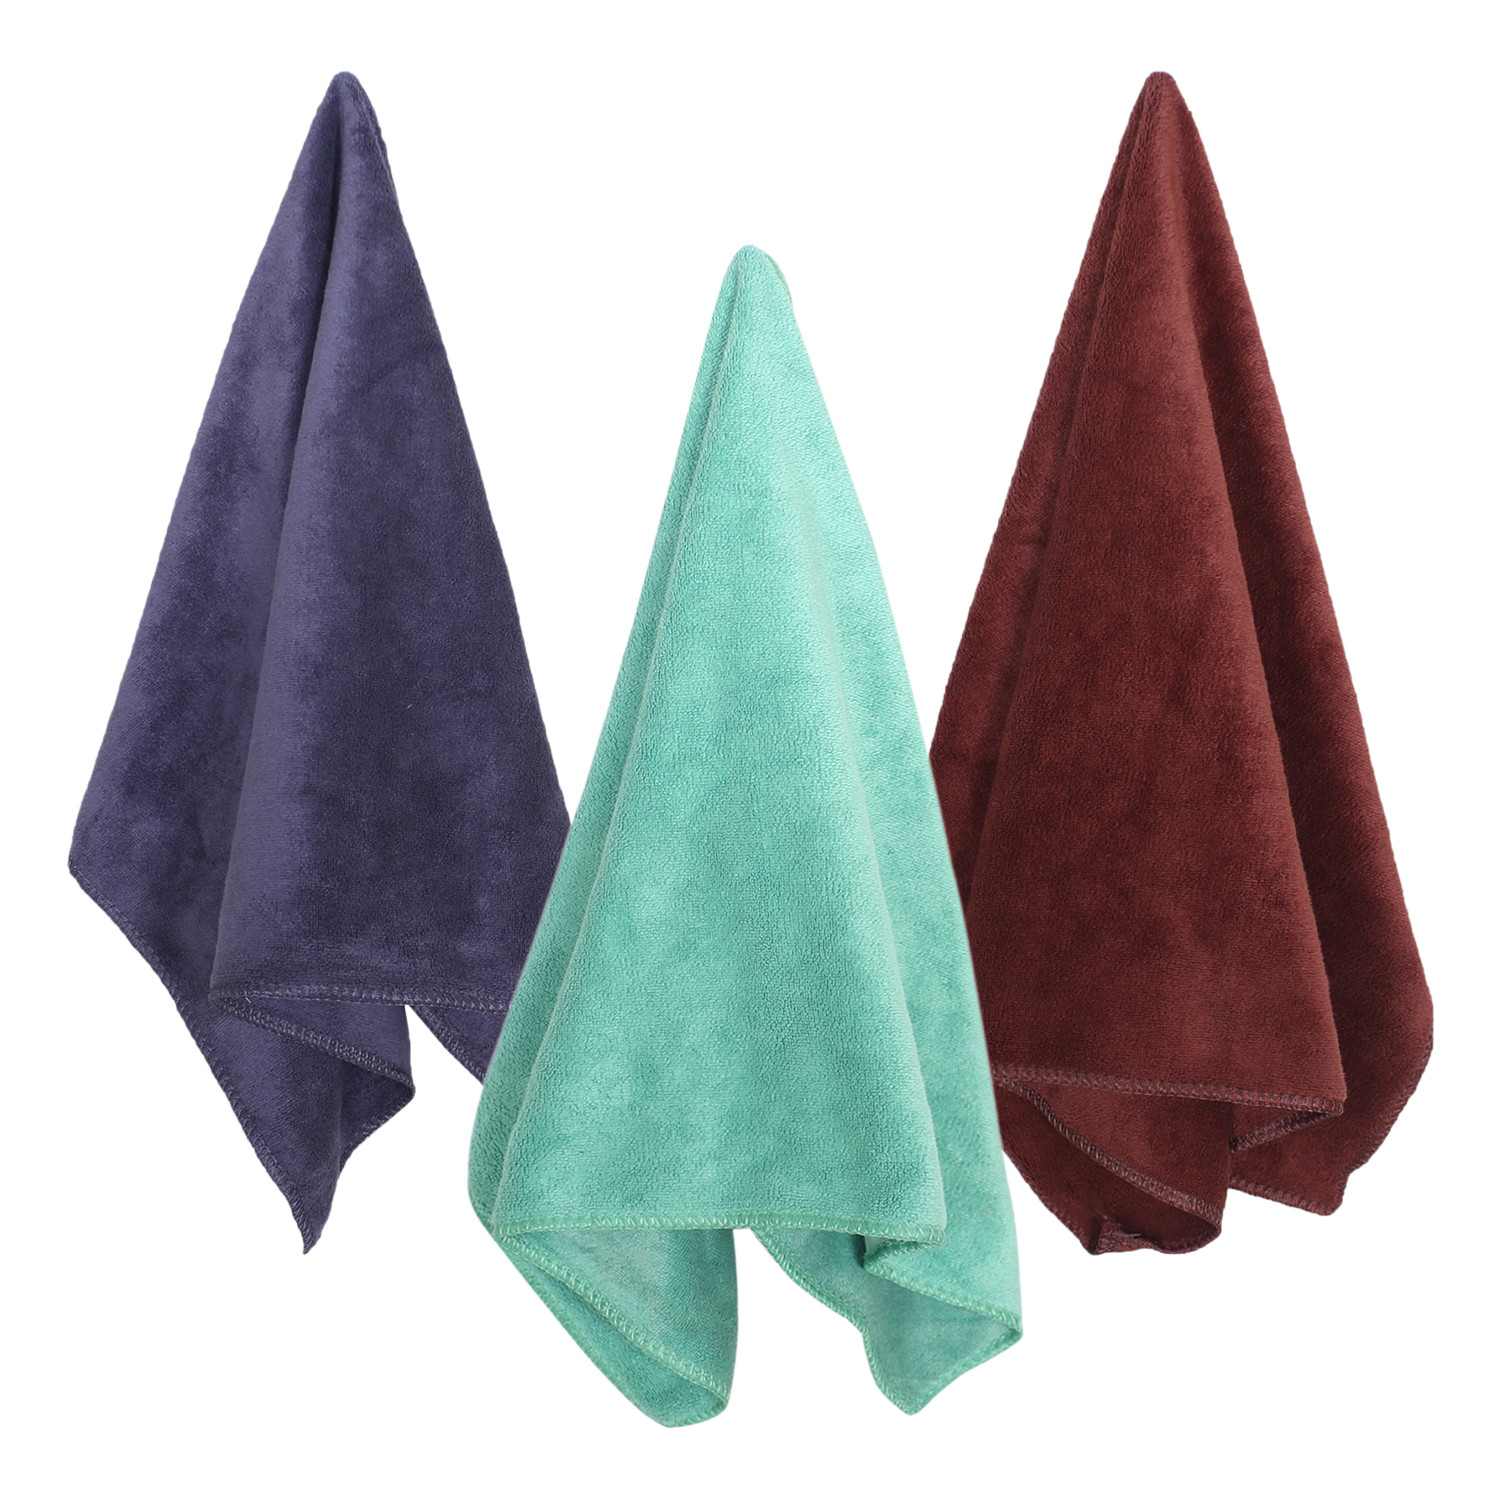 Kuber Industries Cleaning Cloths|Microfiber Highly Absorbent Wash Towels for Kitchen,Car,Window,24 x 16 Inch,Pack of 3 (Green,Gray & Brown)